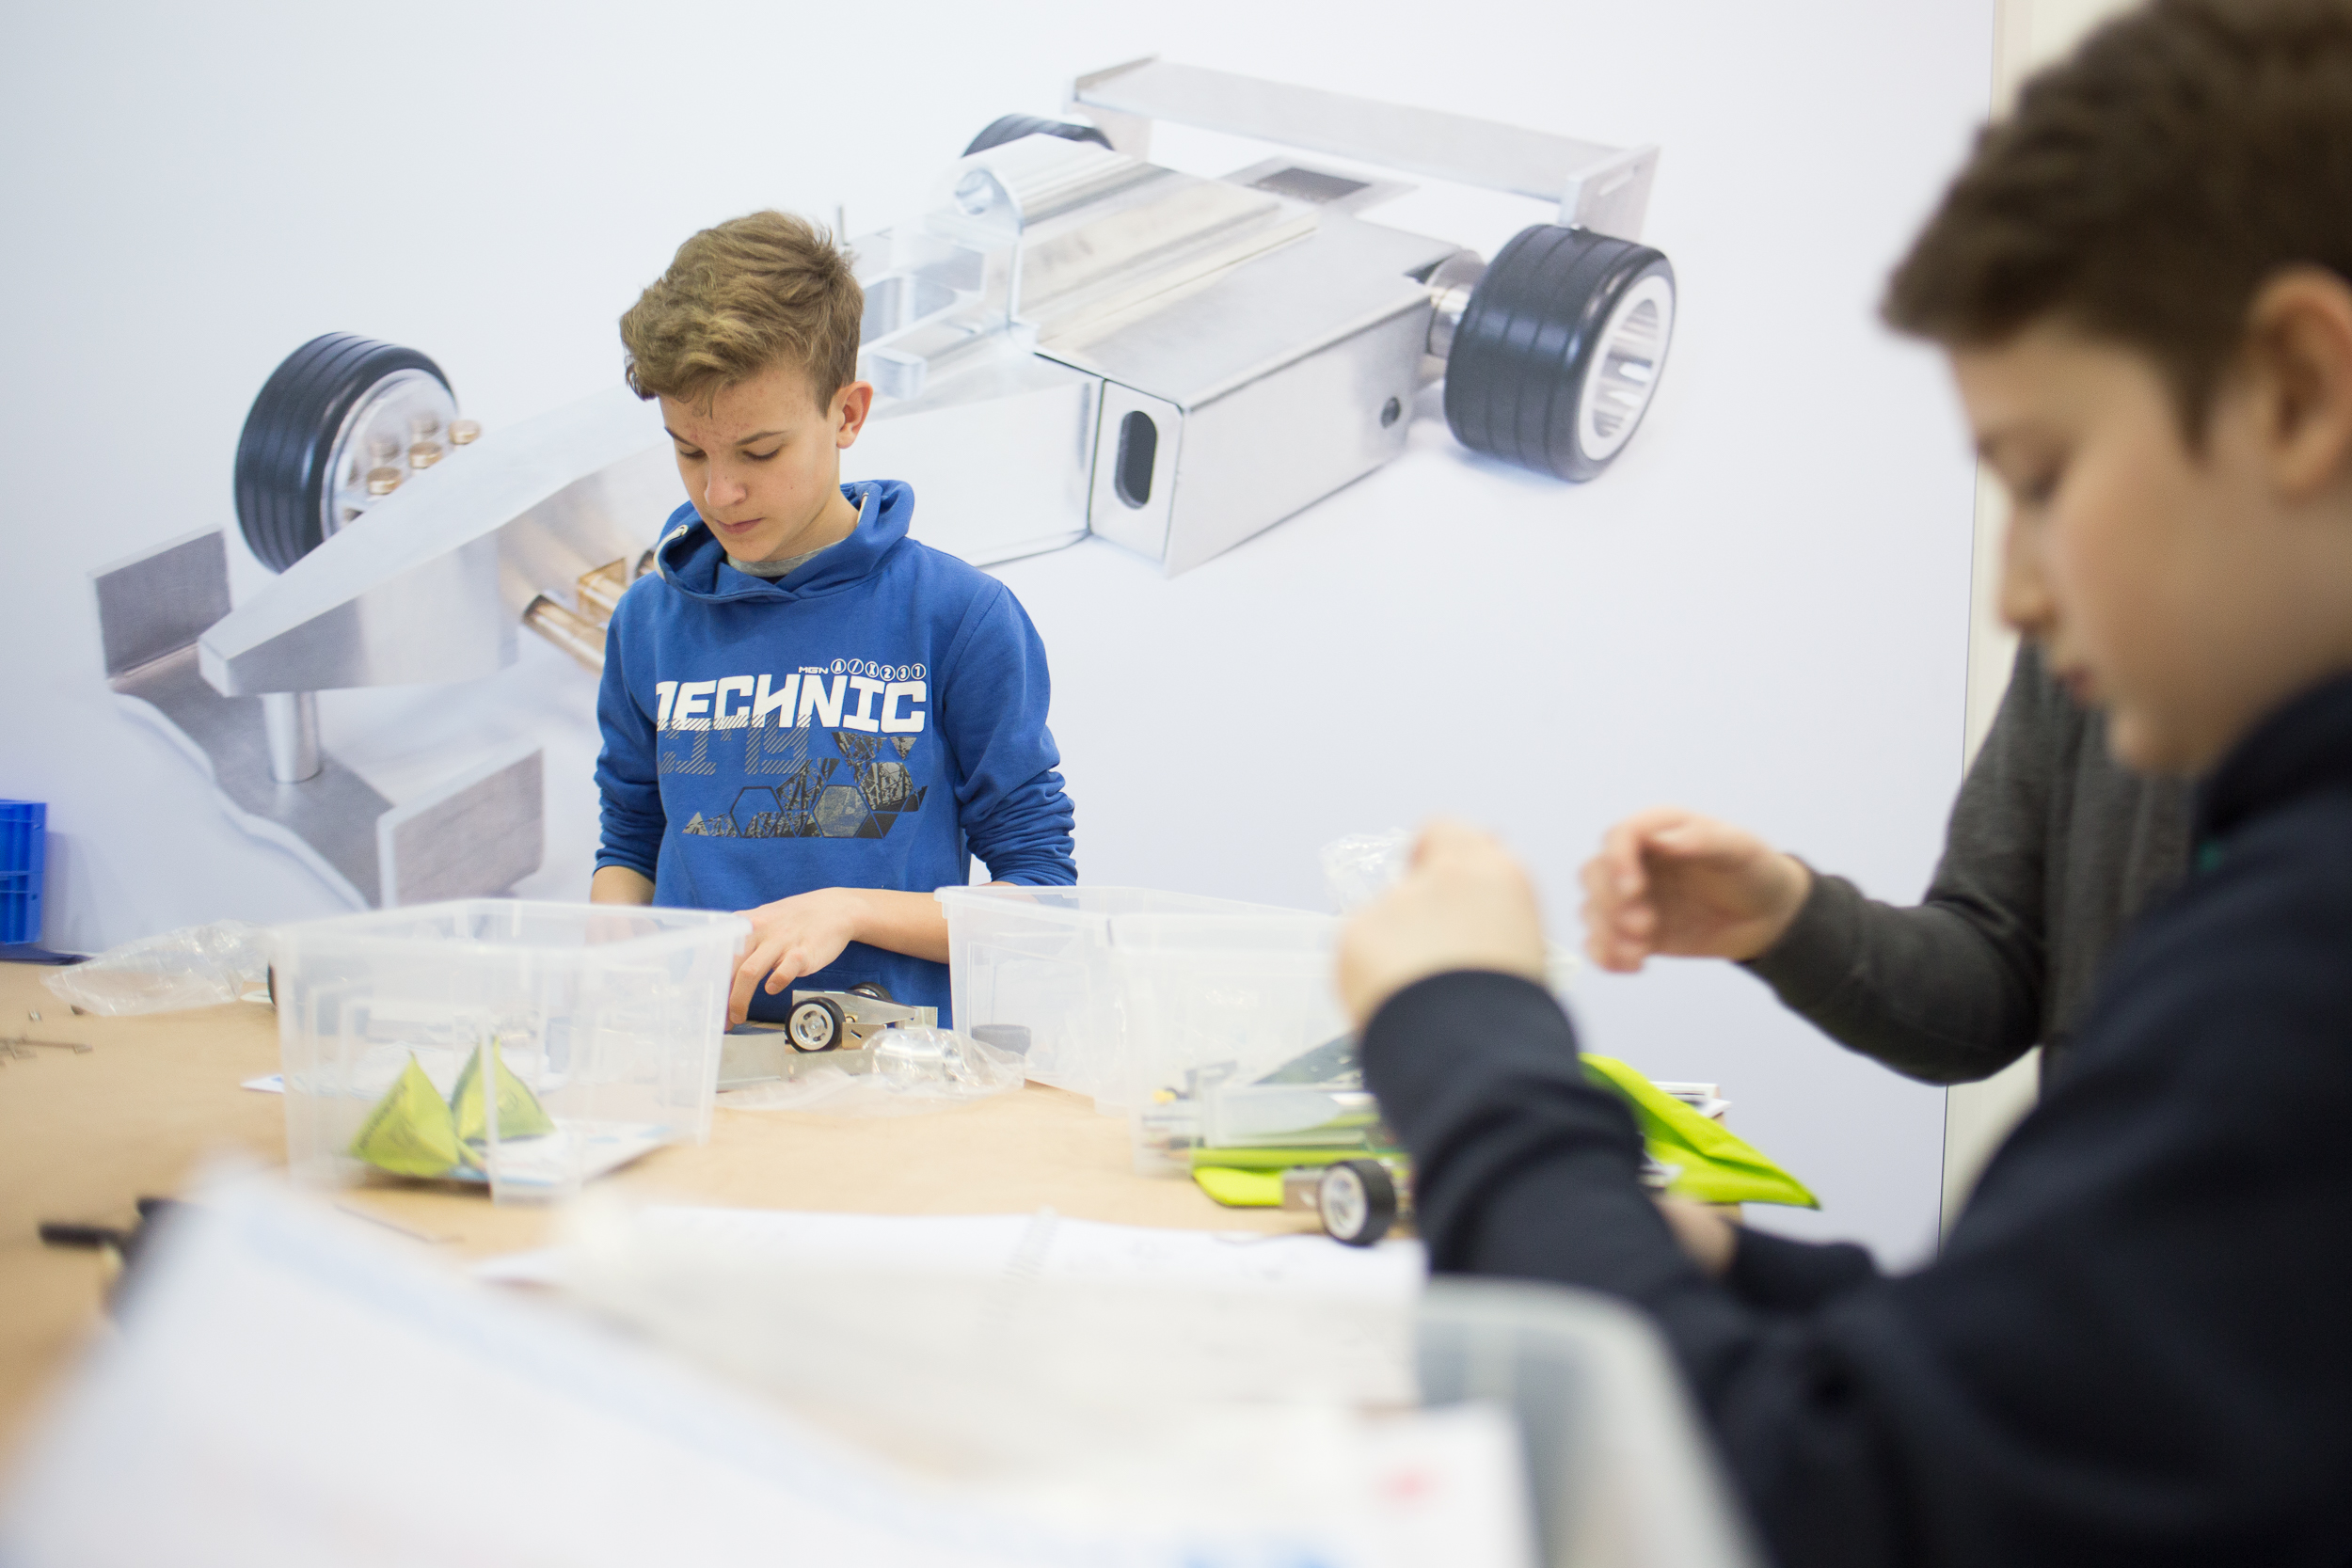 Young visitors can explore the exciting careers offered by mechanical engineering and experience the latest technologies at first hand on the Special Youth Show stand. Photo: Messe Düsseldorf / ctillmann